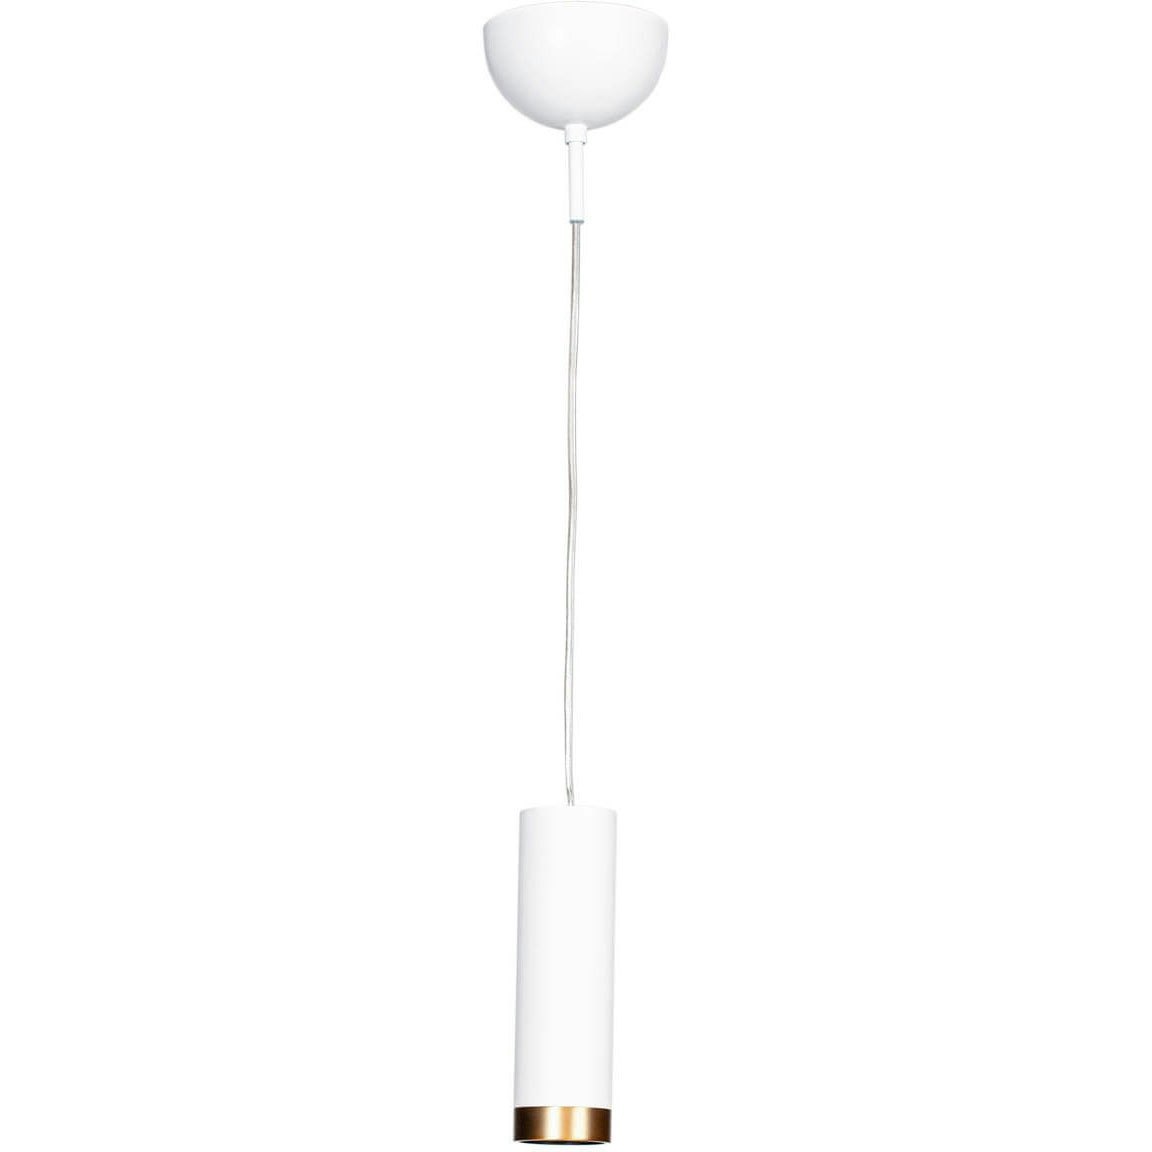 Puls Hanglamp, Wit